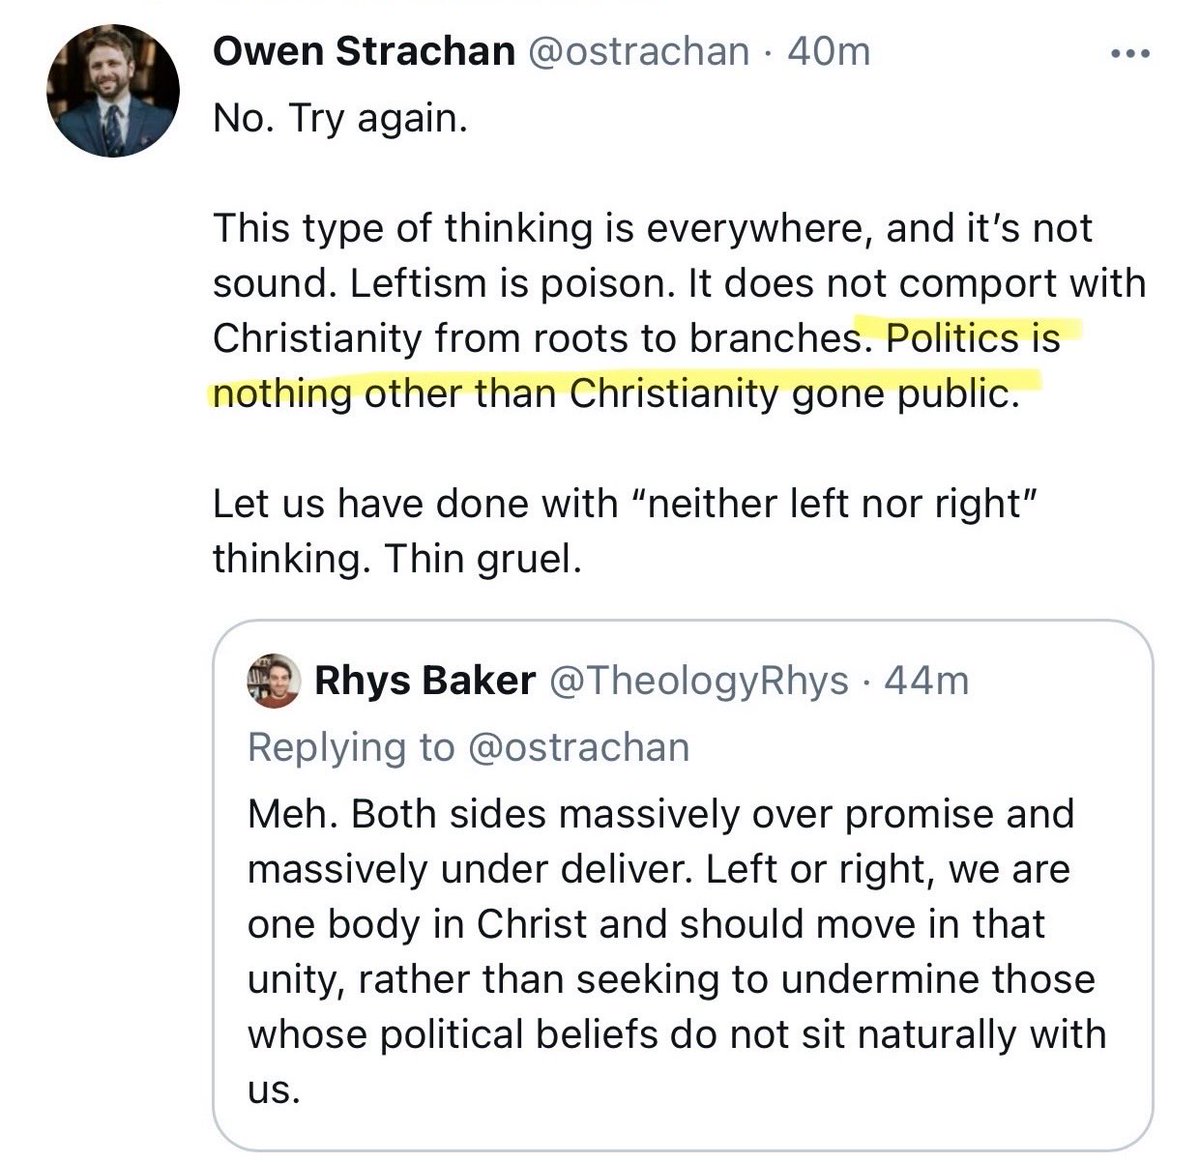 What happened to you Owen? You said politics is nothing more than Christianity externalized in 2021?